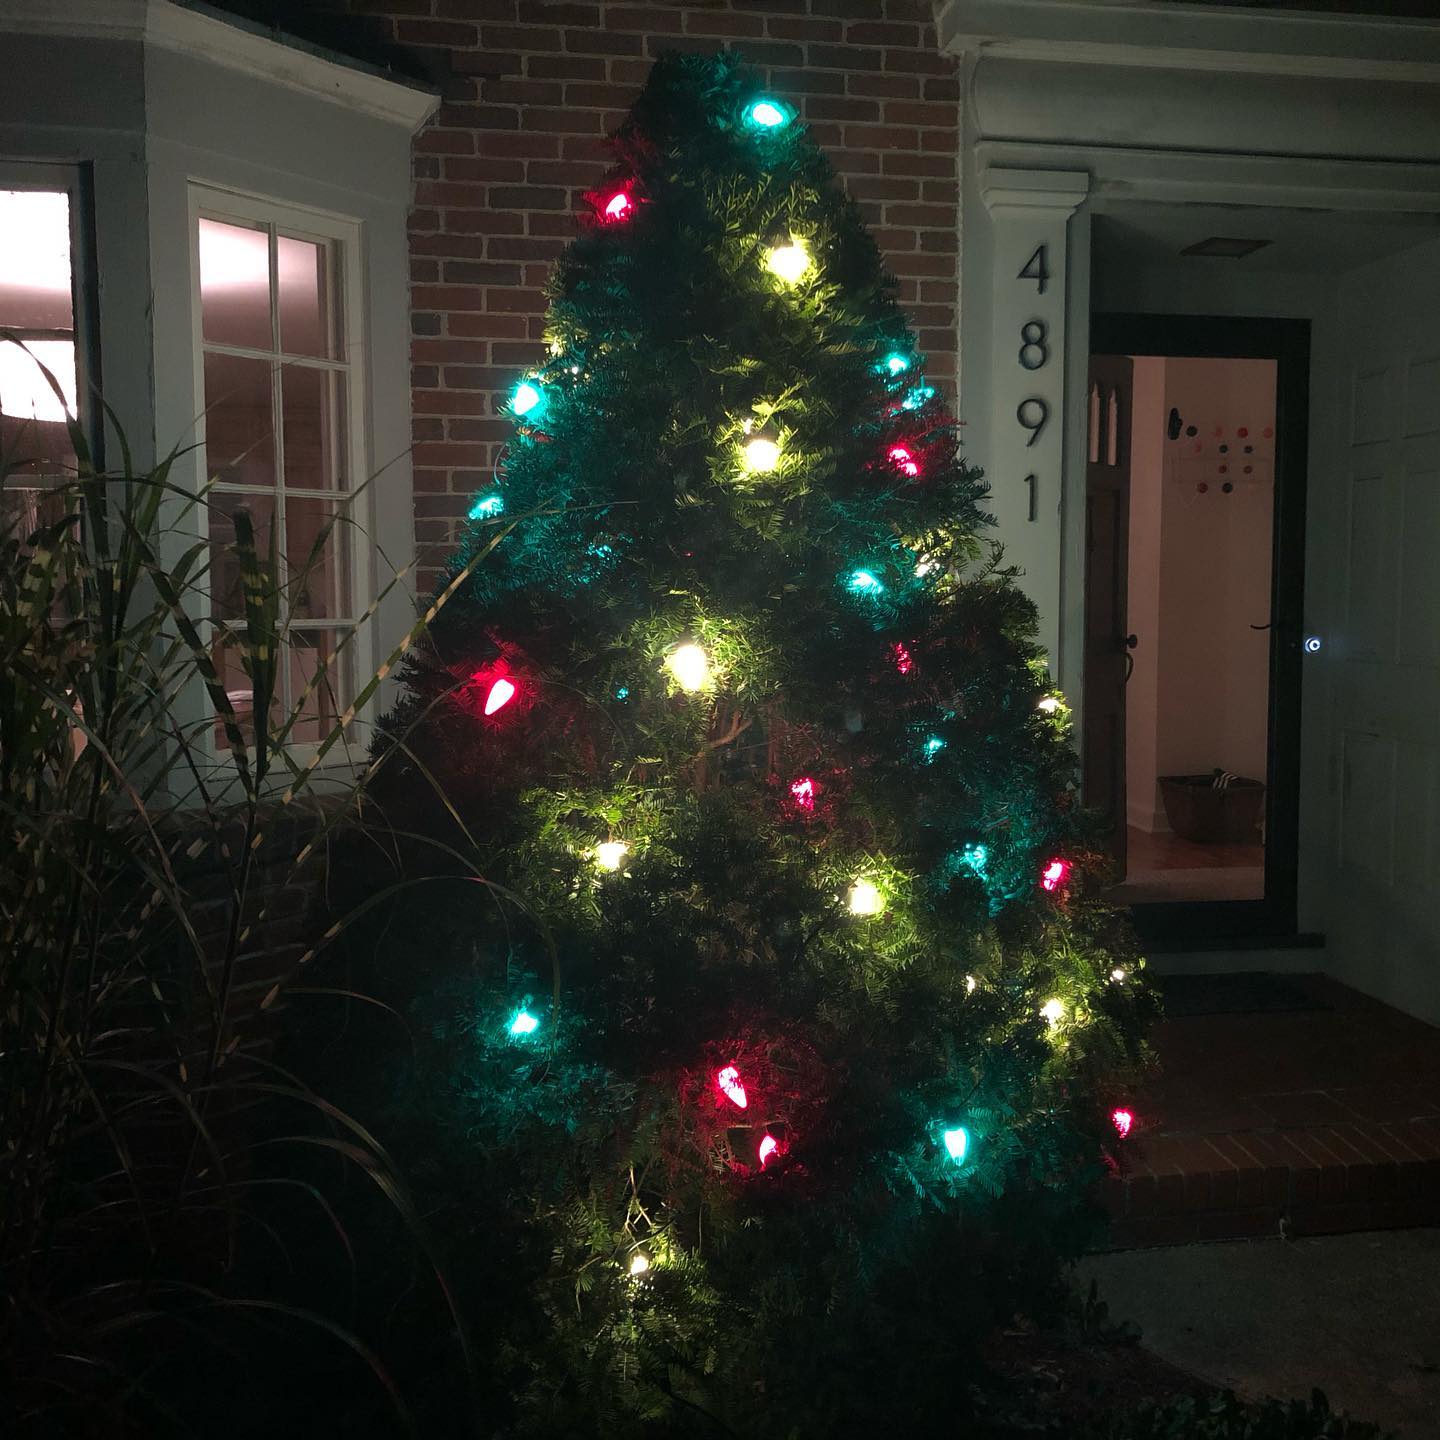 In 2019, the Cheatham Christmas lights will be LED to improve energy efficiency. We’re testing the prototype tonight!